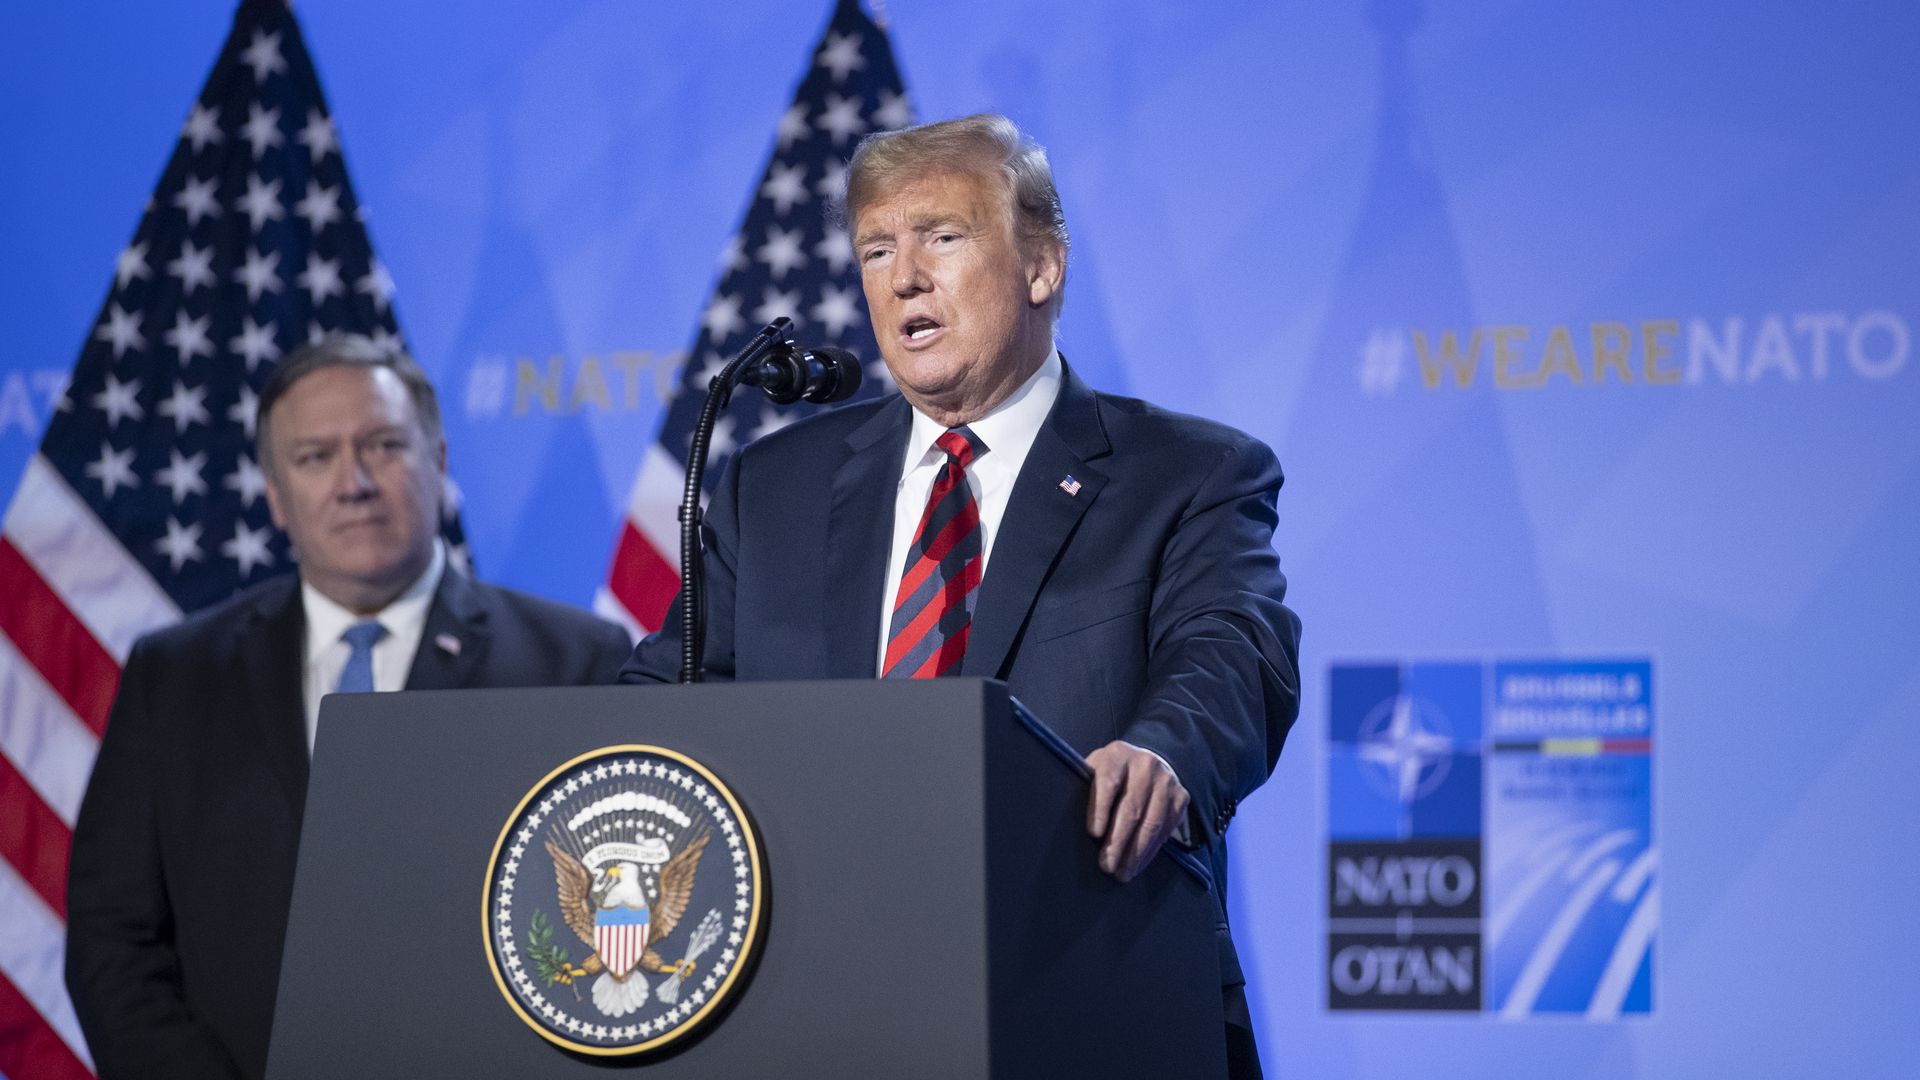 President Donald Trump speaks besides U.S. Secretary of State Mike Pompeo during a news conference at the 2018 NATO Summit.